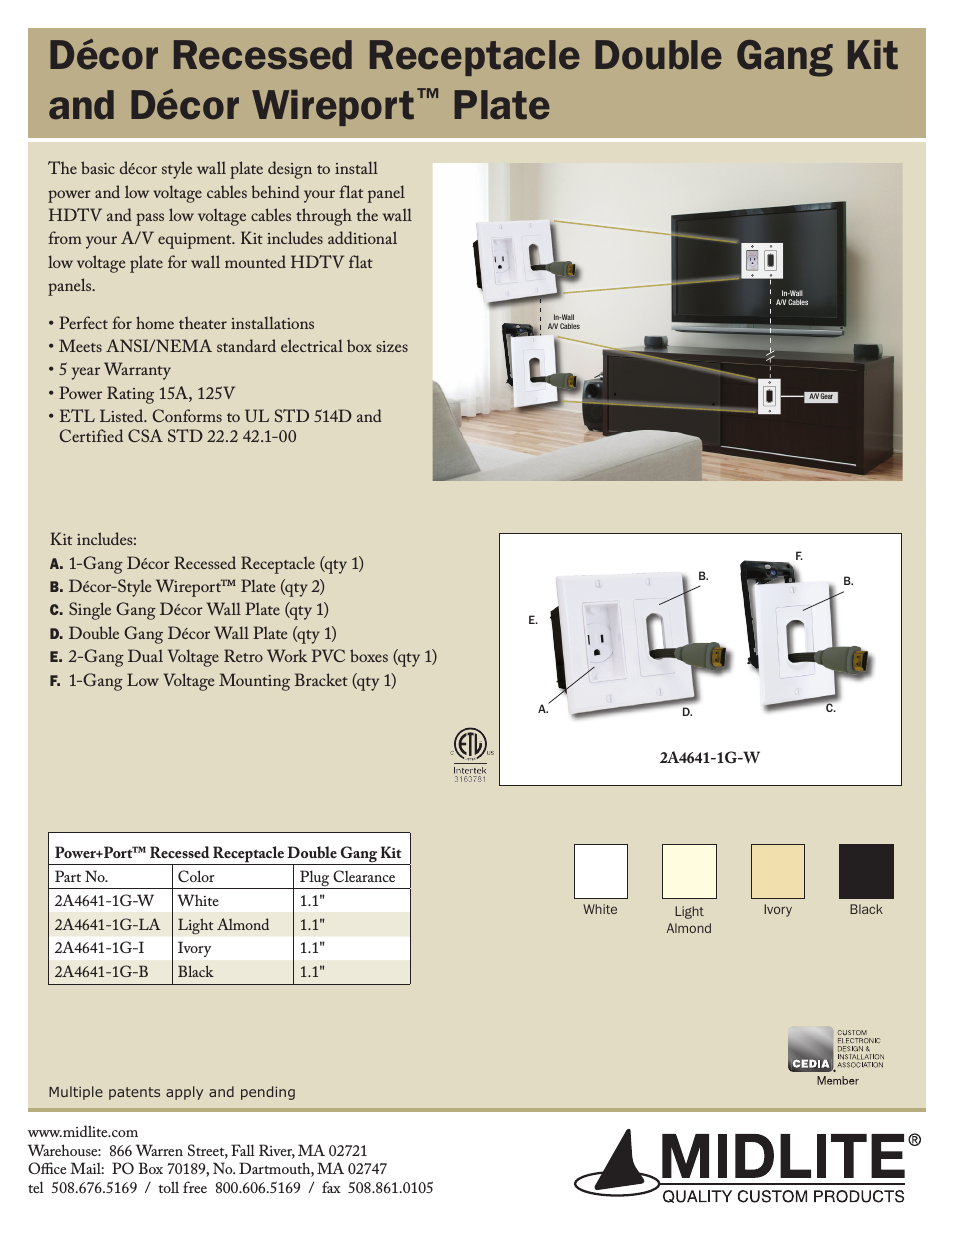 DÉCOR RECESSED RECEPTACLE DOUBLE GANG KIT AND DÉCOR WIREPORT PLATE